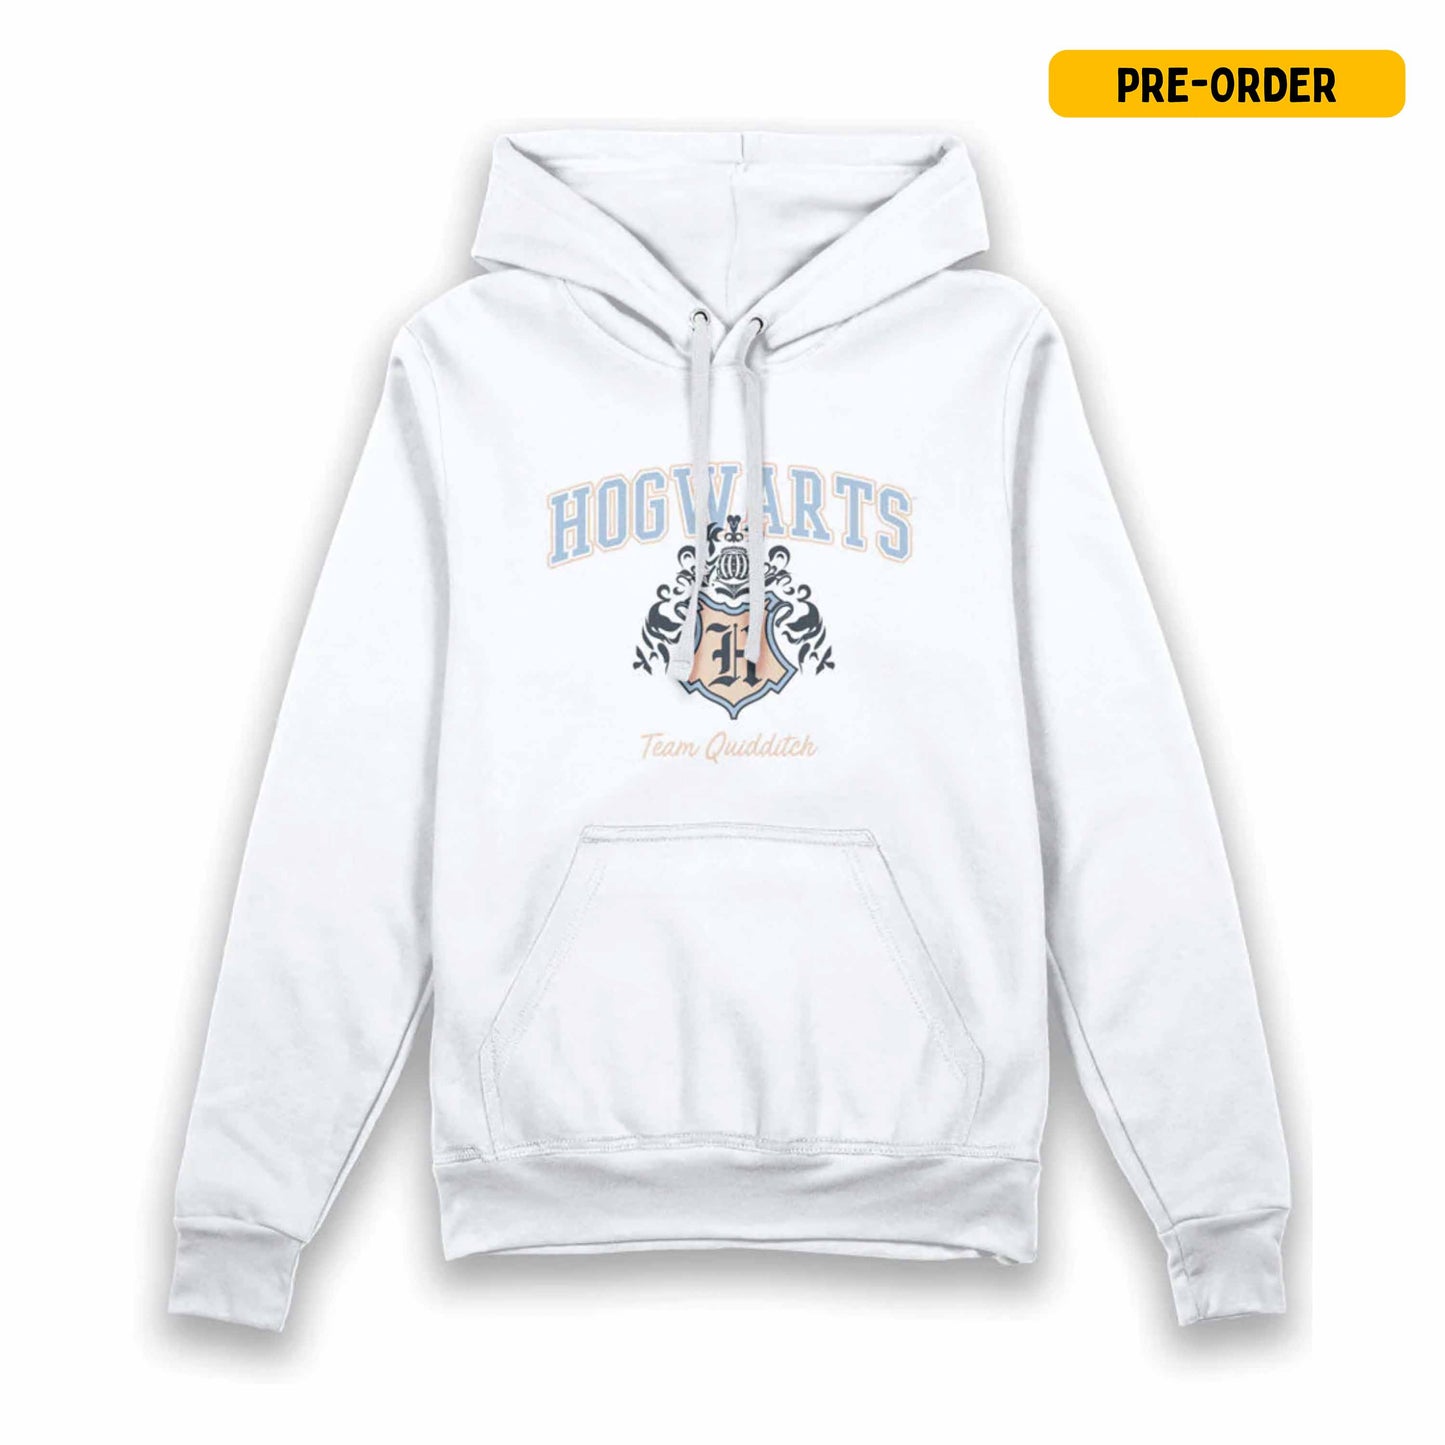 Harry Potter Hogwarts Team Quidditch Adults Hoodie - Unisex - Official Licensed Merchandise